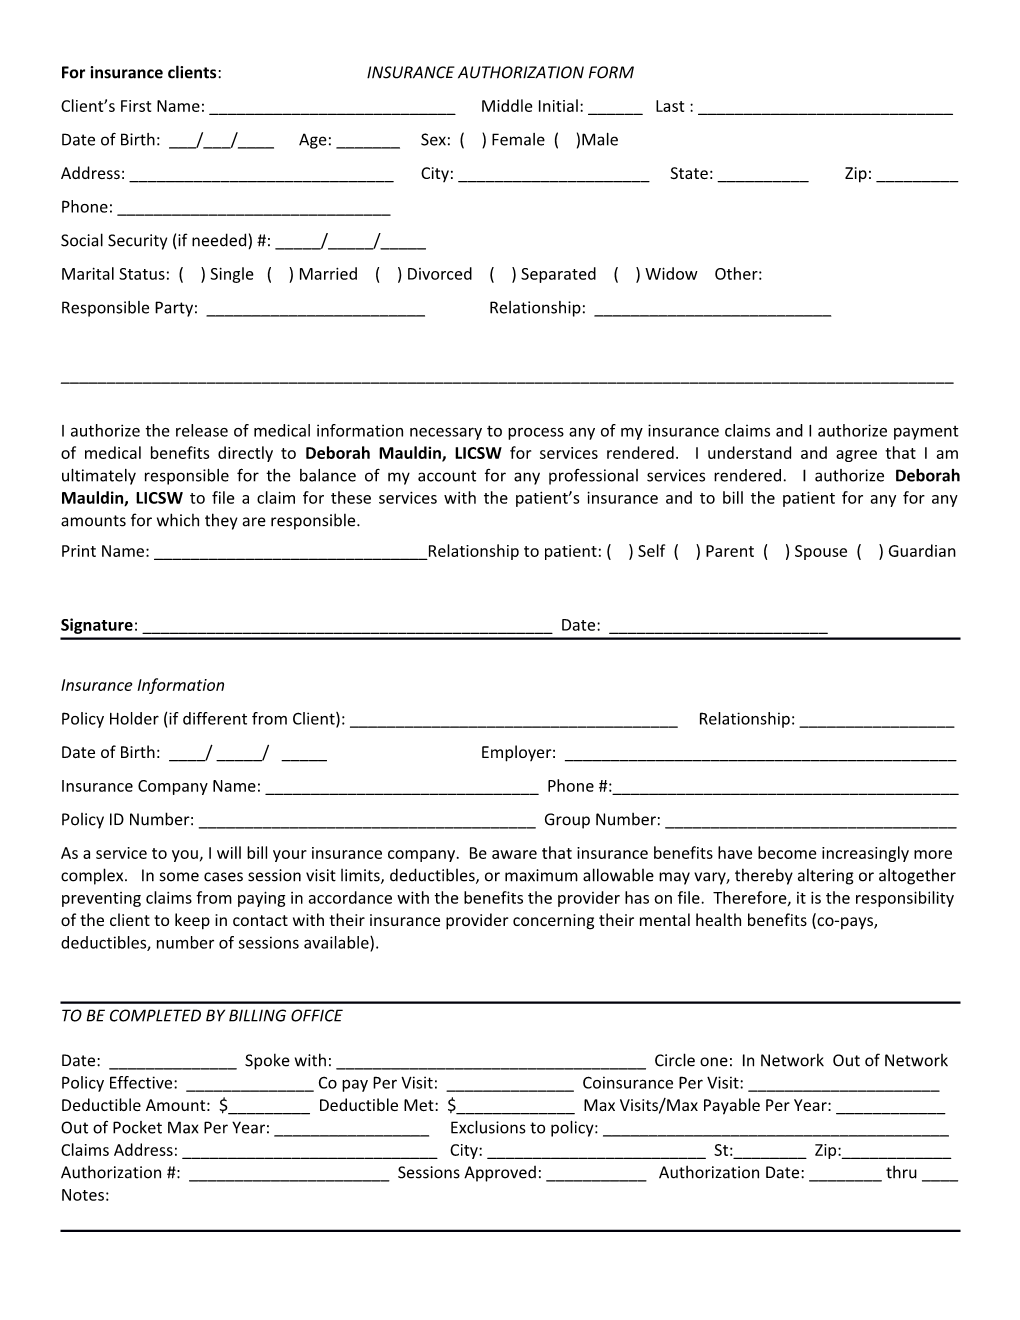 For Insurance Clients : INSURANCE AUTHORIZATION FORM